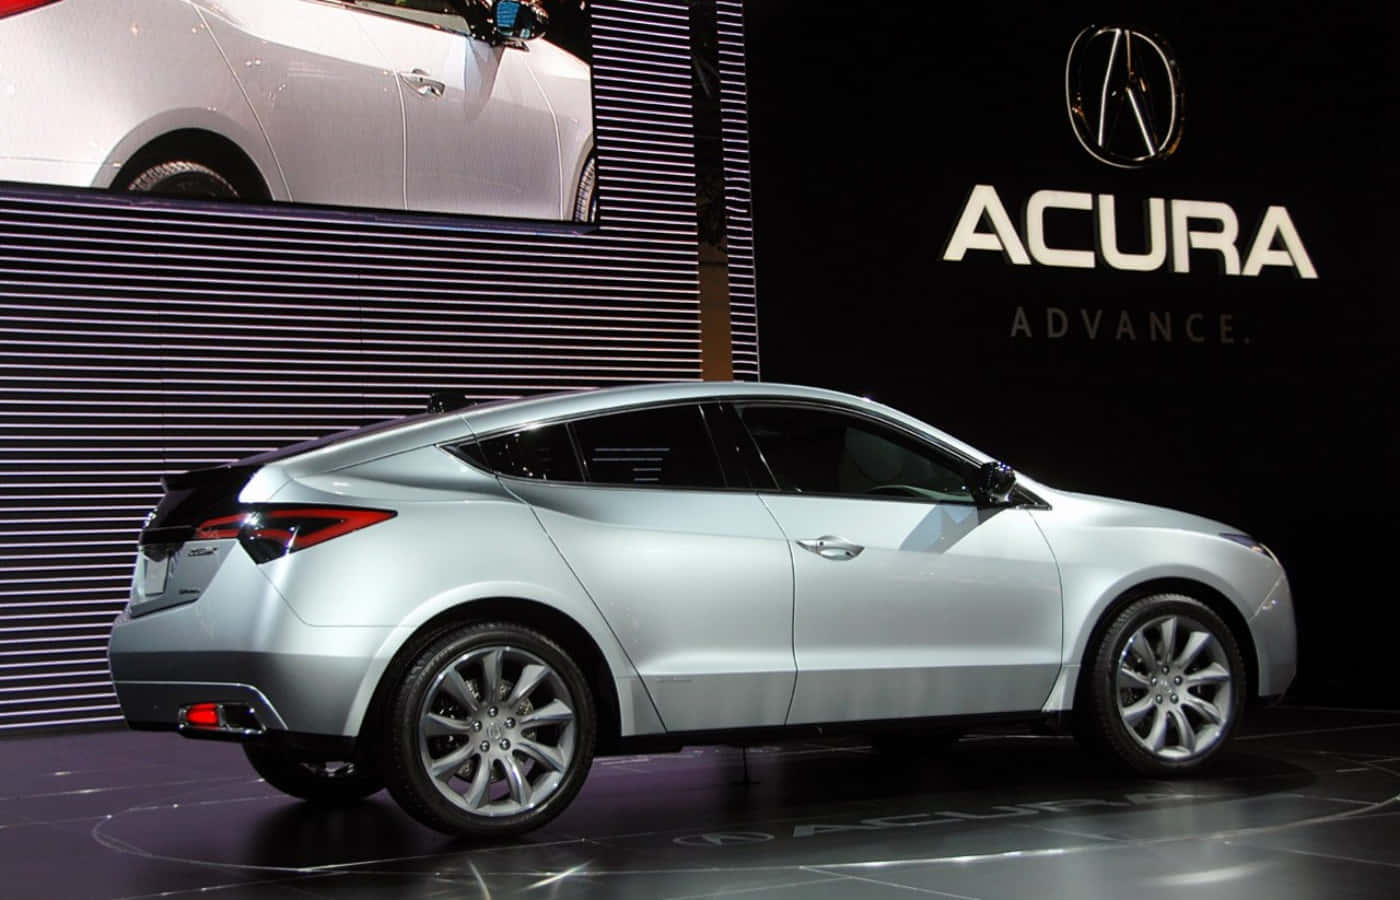 A sleek and modern Acura equipped for luxury driving